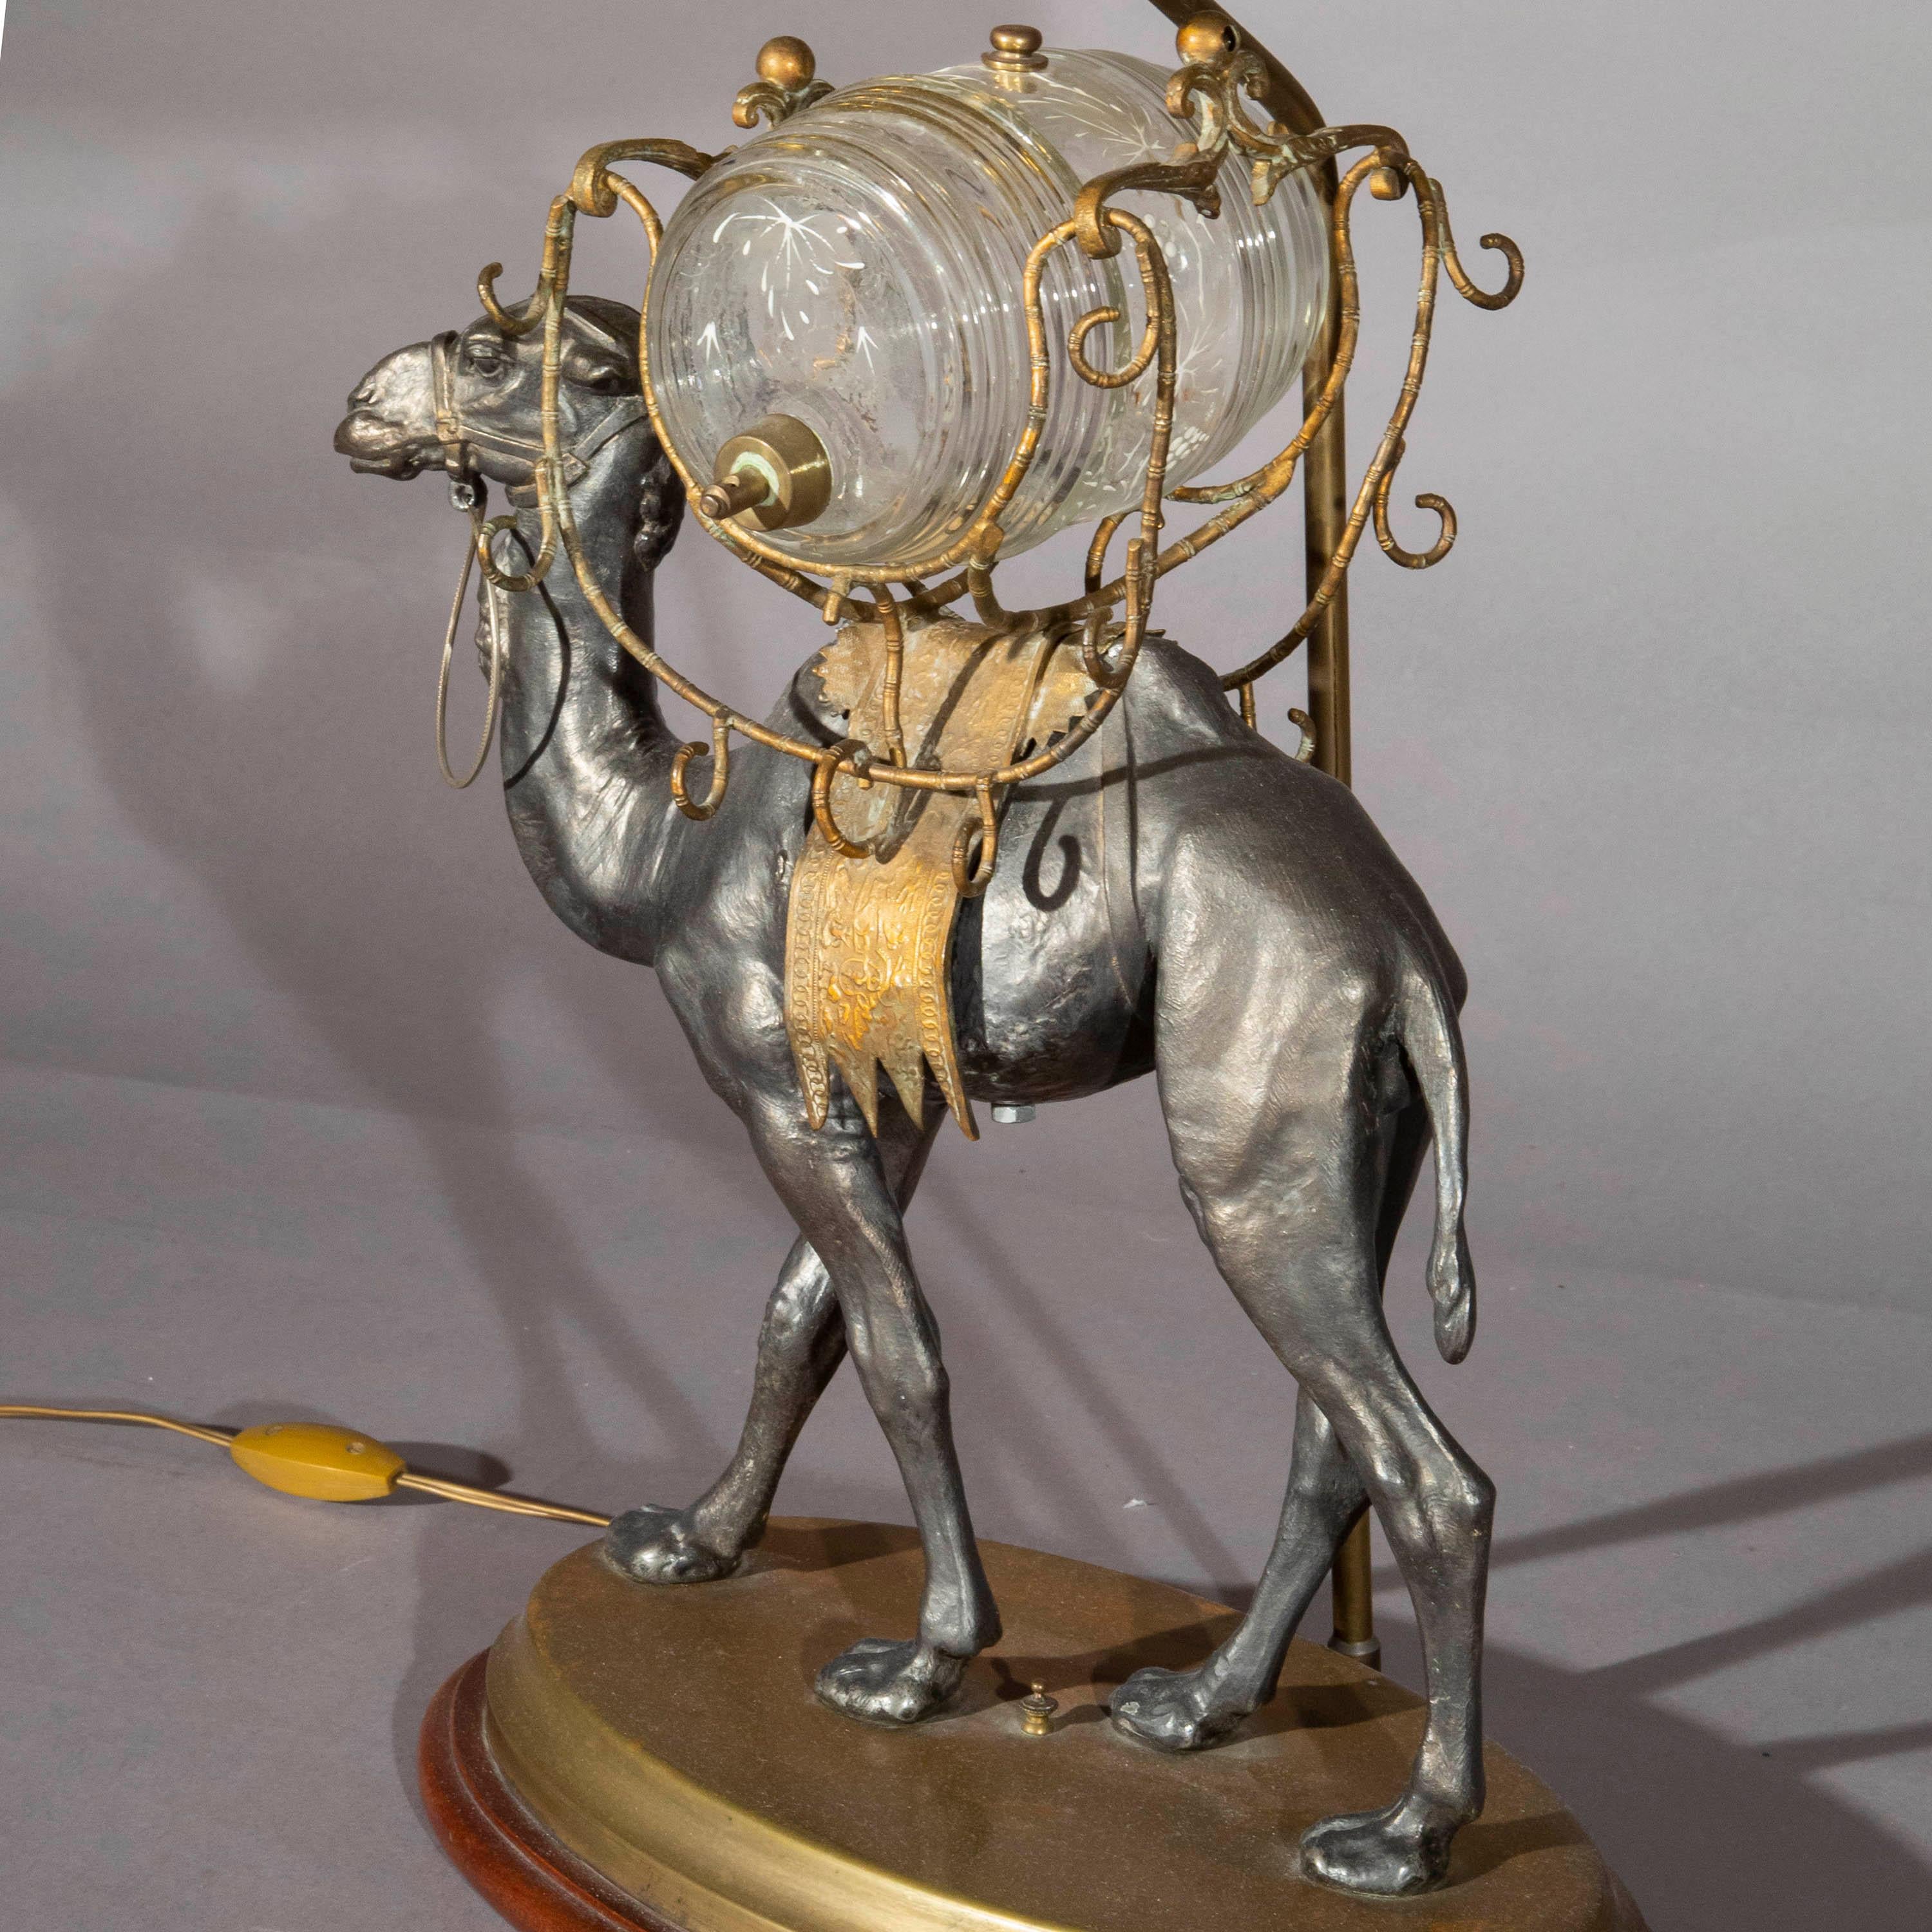 Brass Antique Camel Table Lamp with Gilded Shade, 19th Century